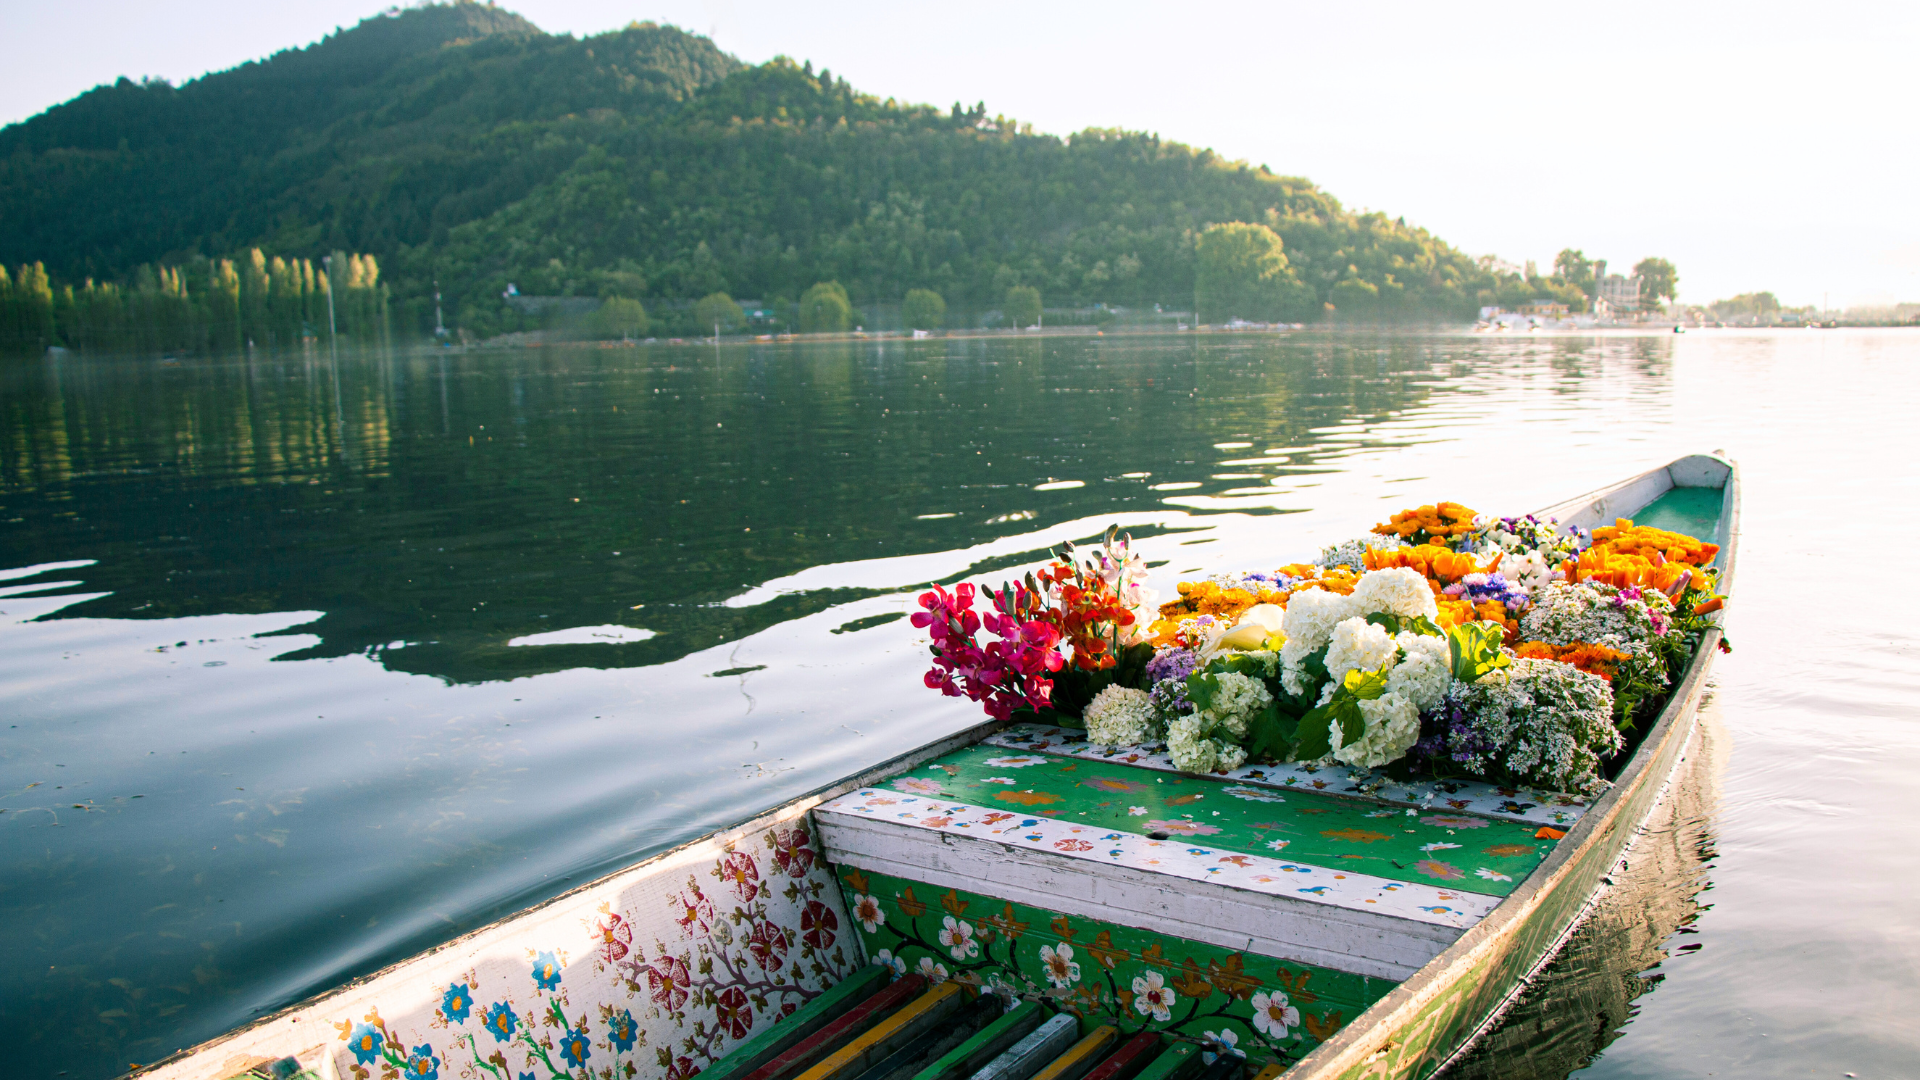 Painted canoe on the water full of flowers